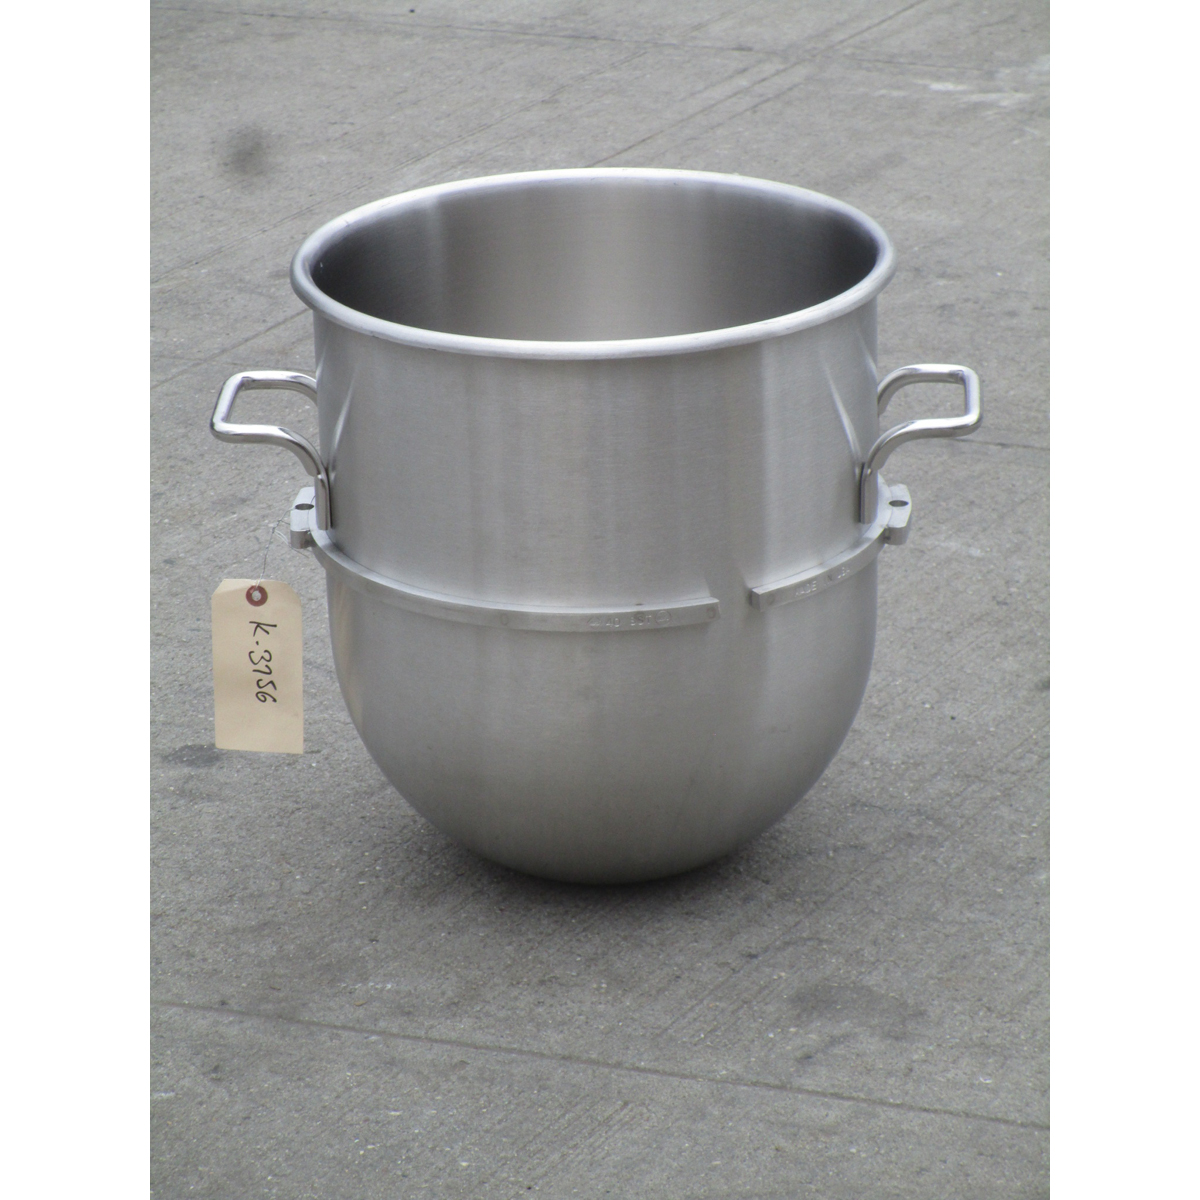 Hobart 00-315245 40 QT Stainless Steel Bowl for D340 Mixer, Used Excellent Condition